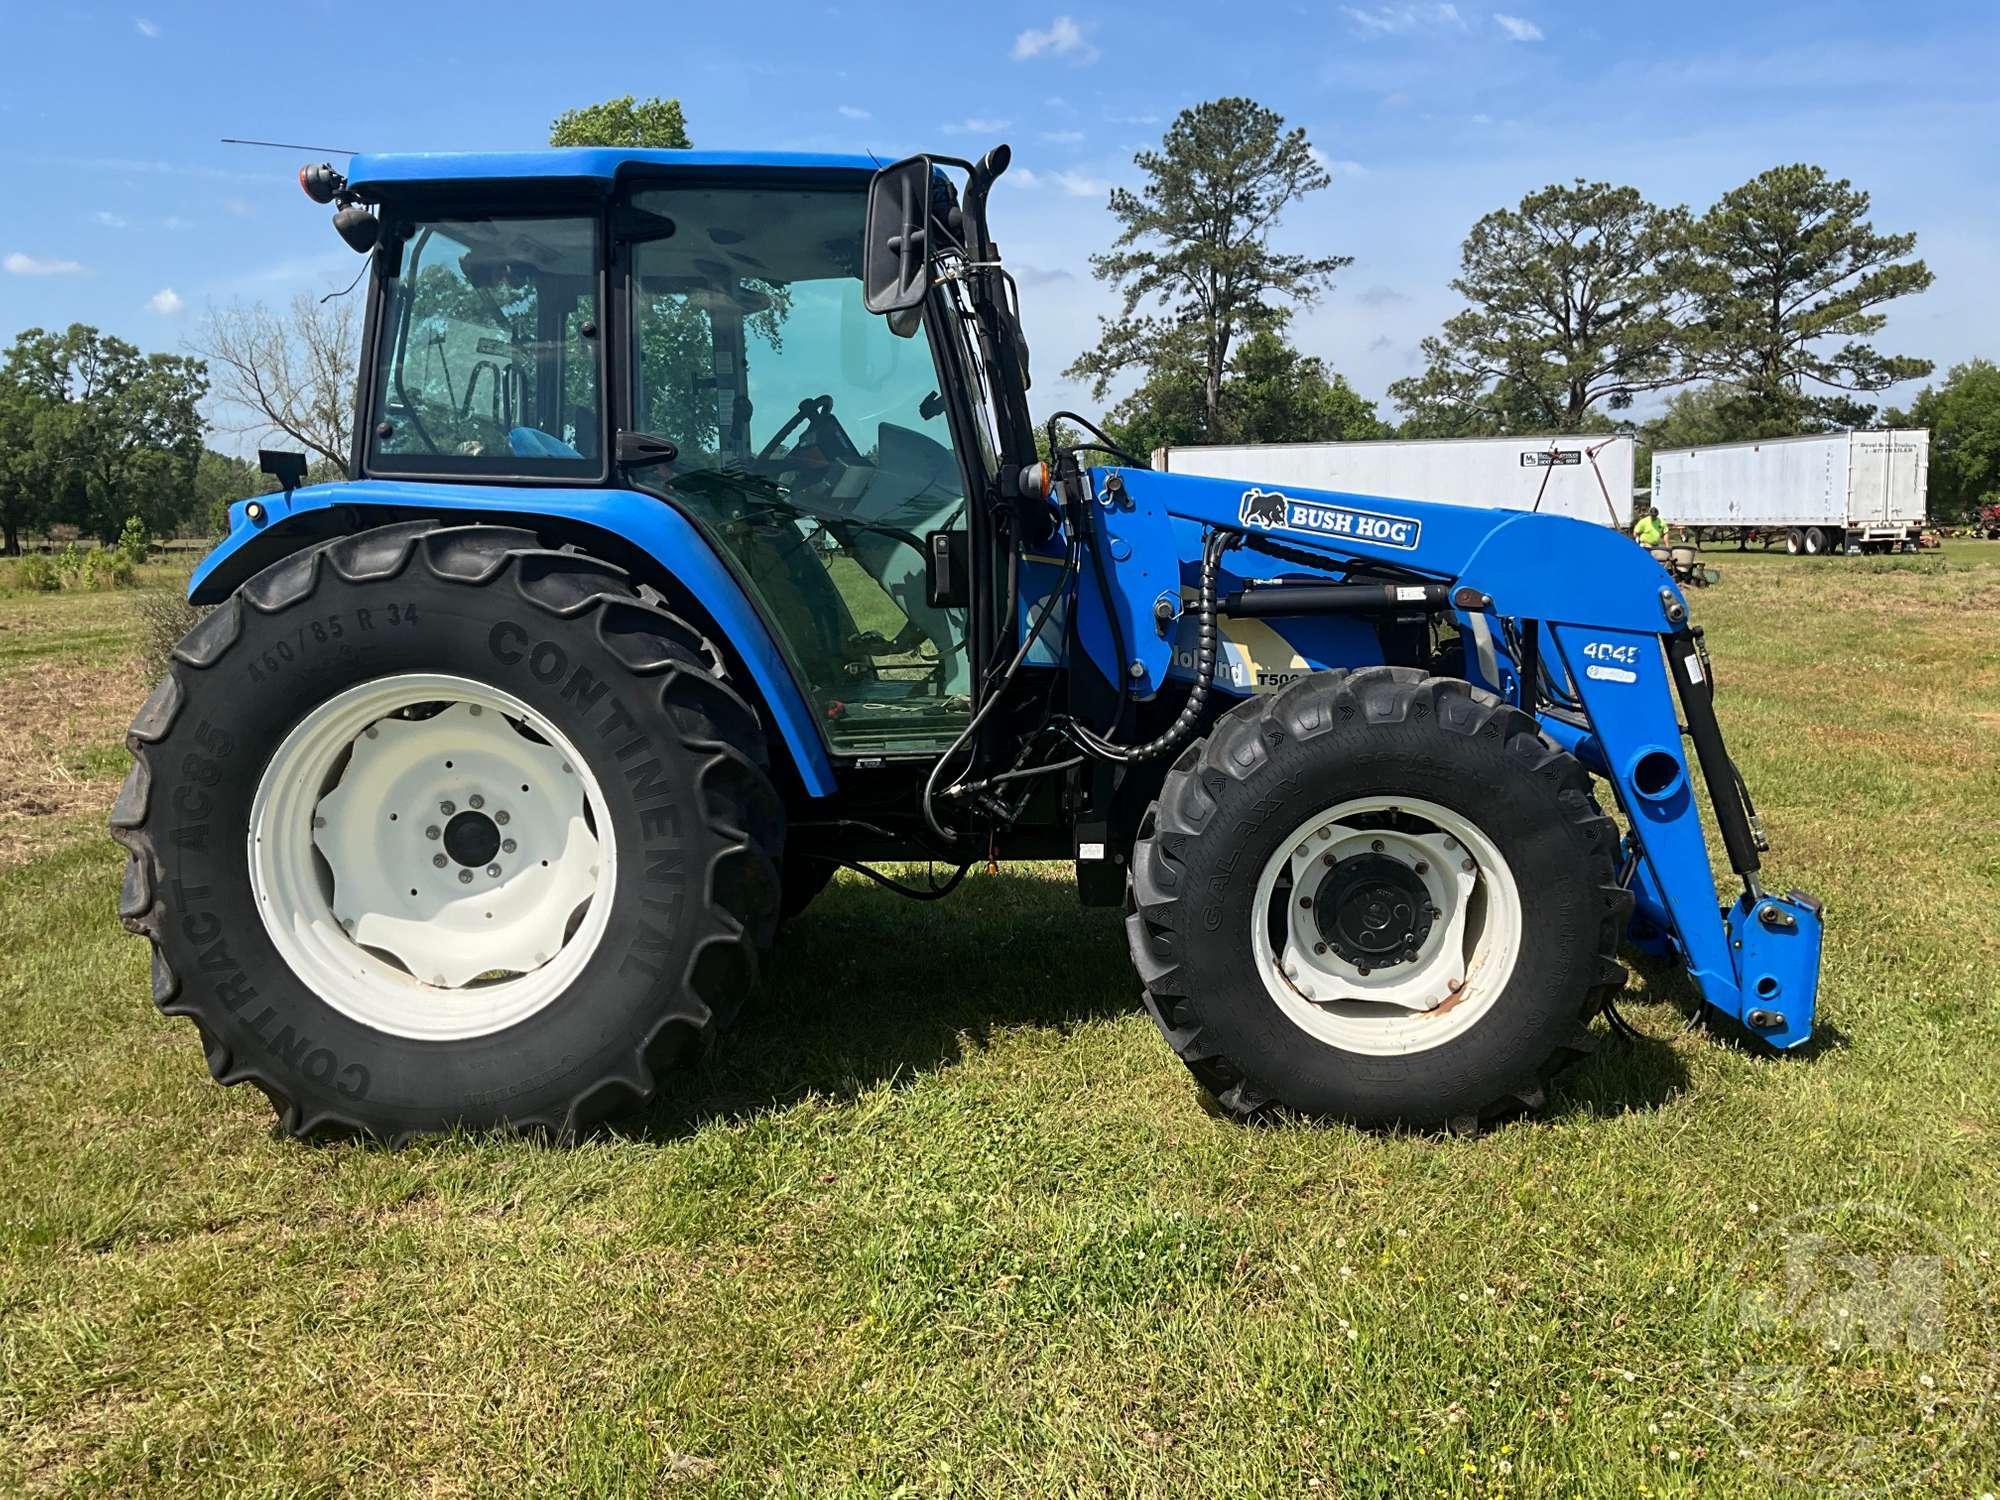 NEW HOLLAND T5060 4X4 TRACTOR W/ LOADER SN: ZBJH24022